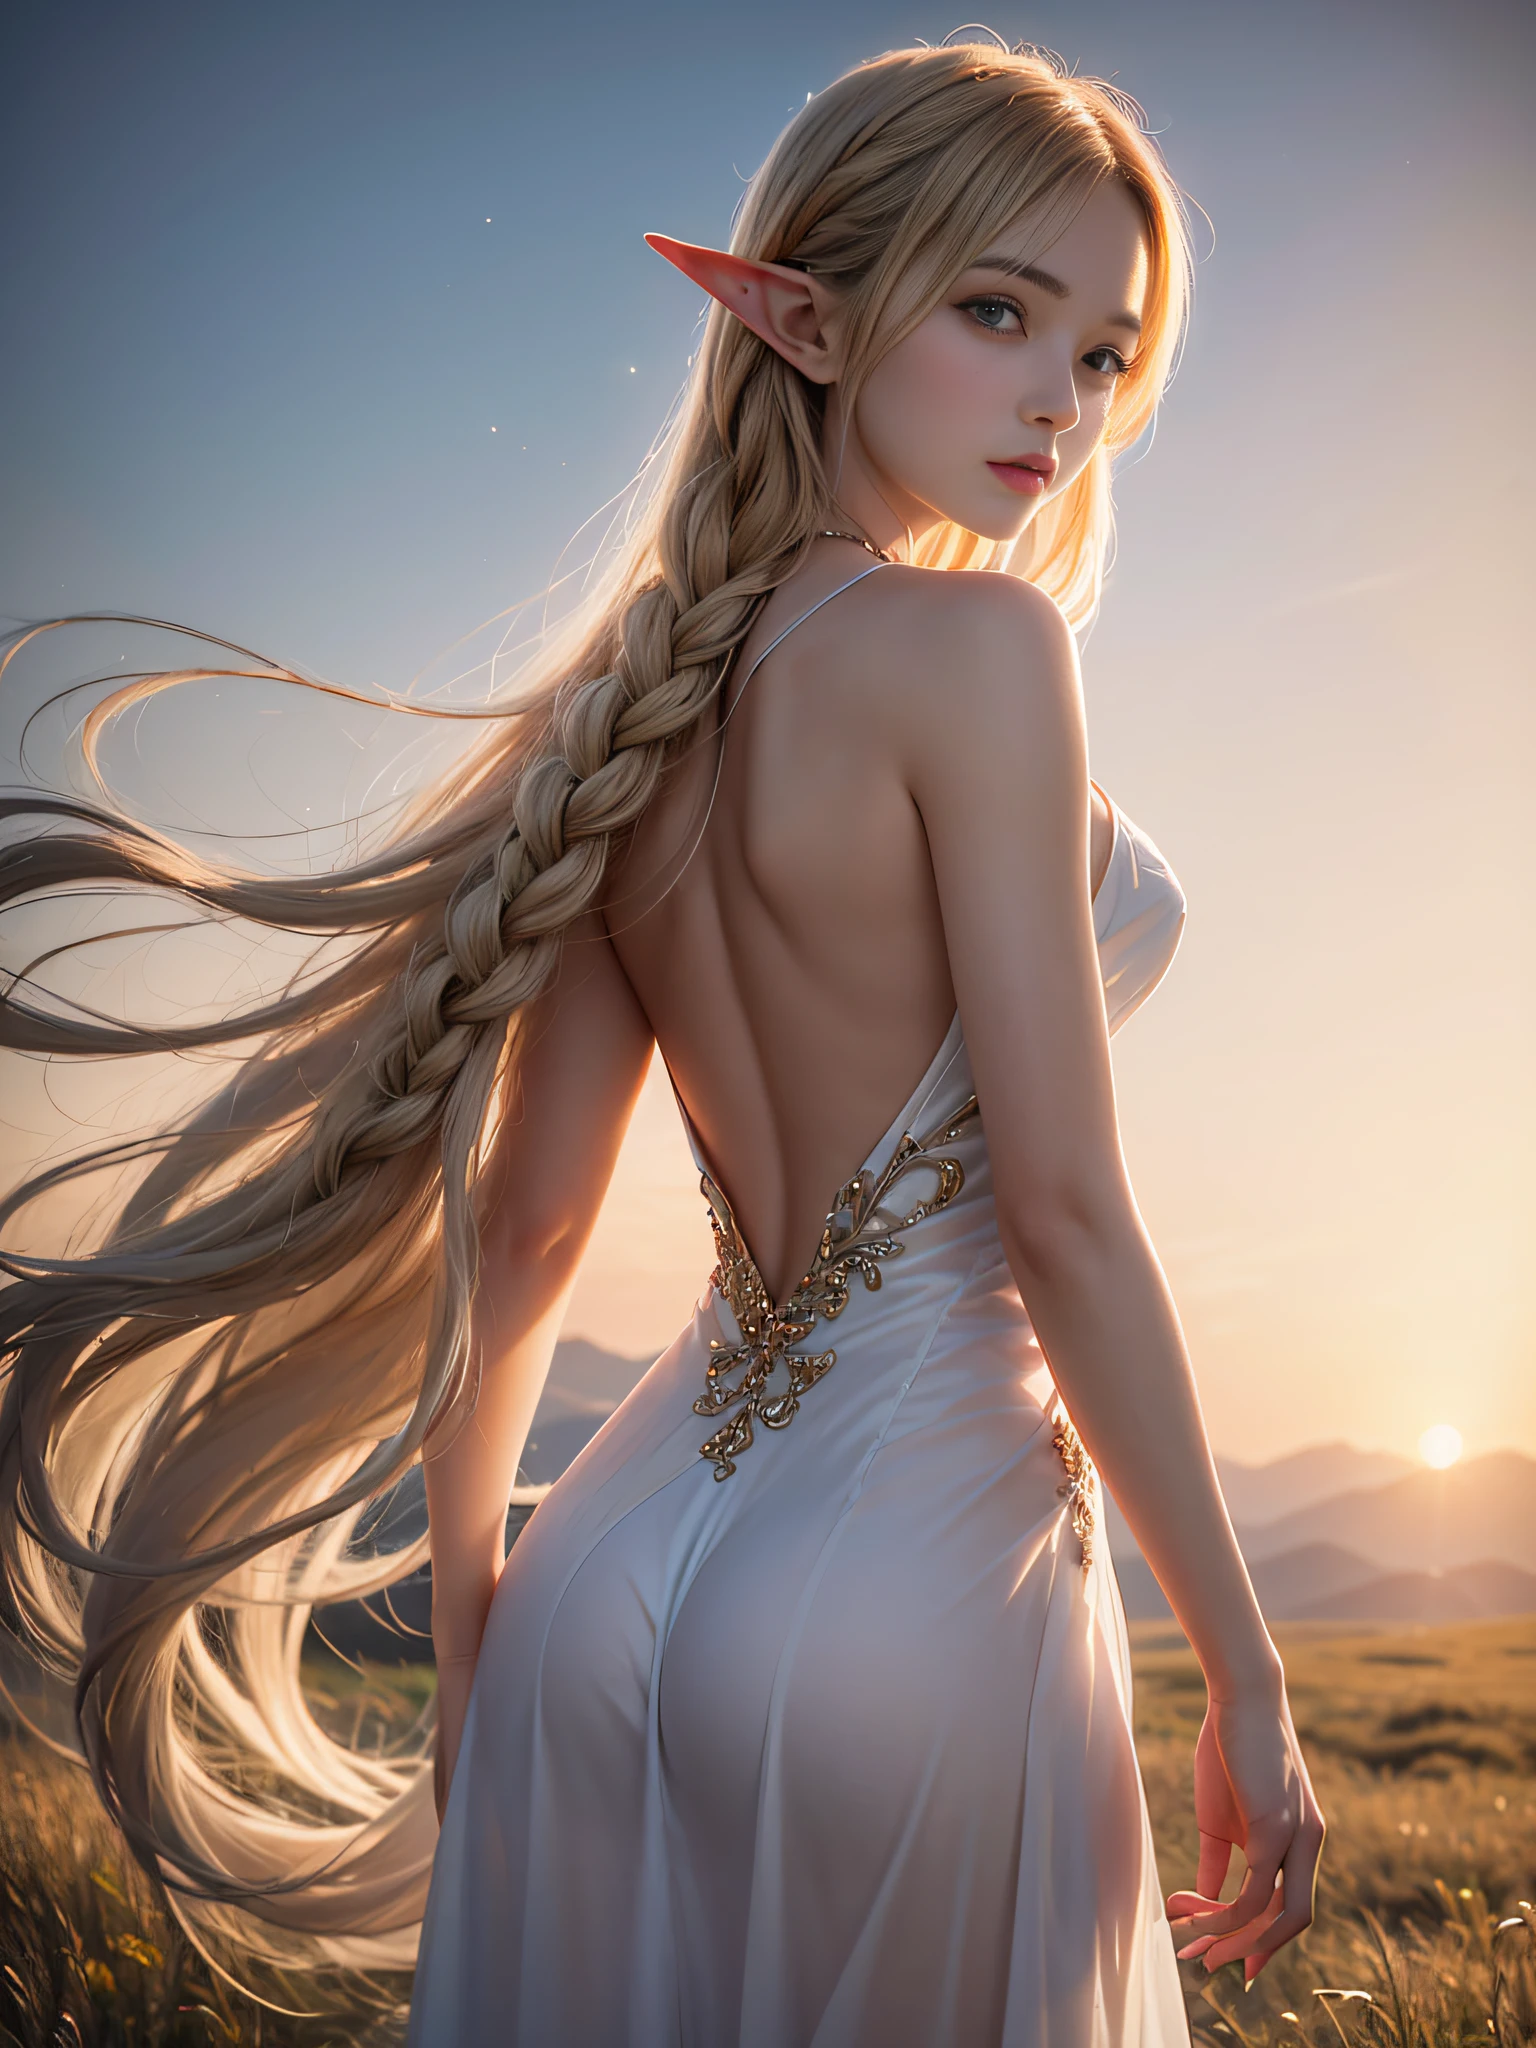 Graceful elven girl standing in meadow, Delicate face illuminated by the soft light of the setting sun. Her long, Flowing hair runs down your back, Decorated with intricate braids、Adorned with sparkling gemstones. This great photo is、、、It captures the ethereal beauty of elves. Slender figure in silk dress、Swaying in the soft steppe breeze. Attention to detail、Face that is、Face that is、Face that is、Face that is、It is evident in the intricate patterns of the dress and the subtle highlights of the luminescence. skin. The breathtaking portrayal of the elven girl is、、、、、Create an enchanting atmosphere、It invites the viewer to a magical world. transparent blonde hair,